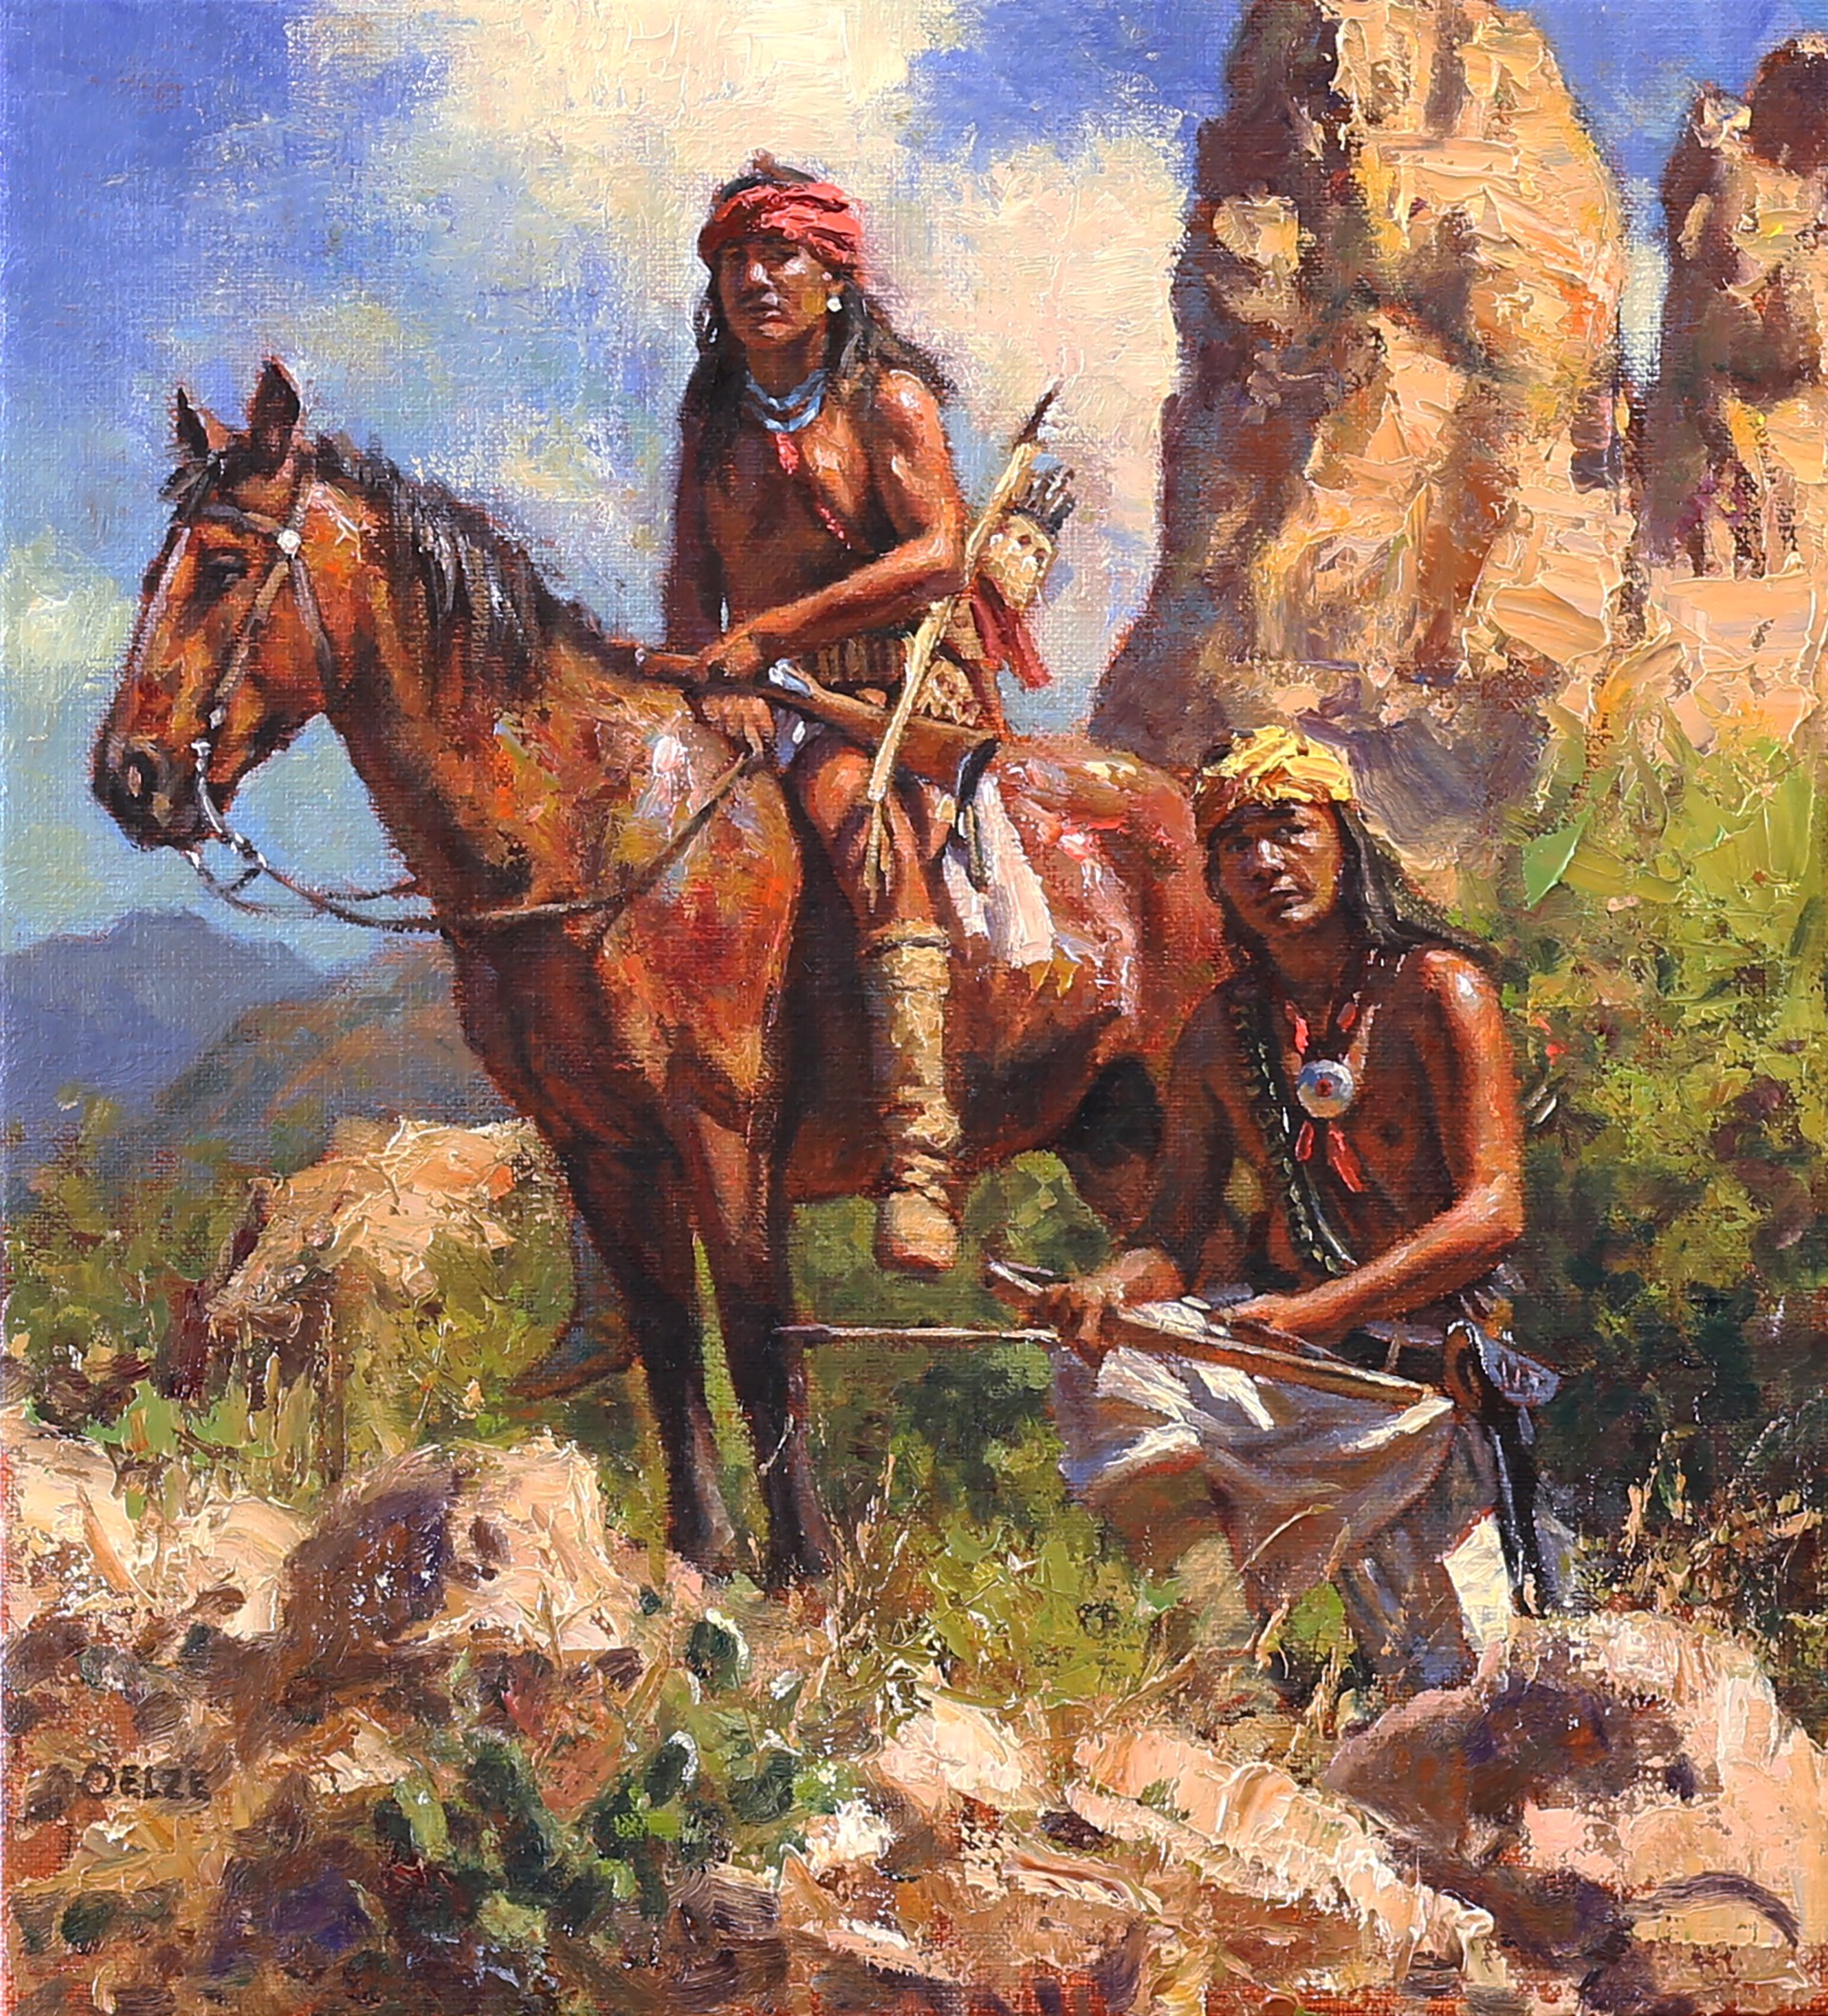 Eagles of the Southwest by Don Oelze